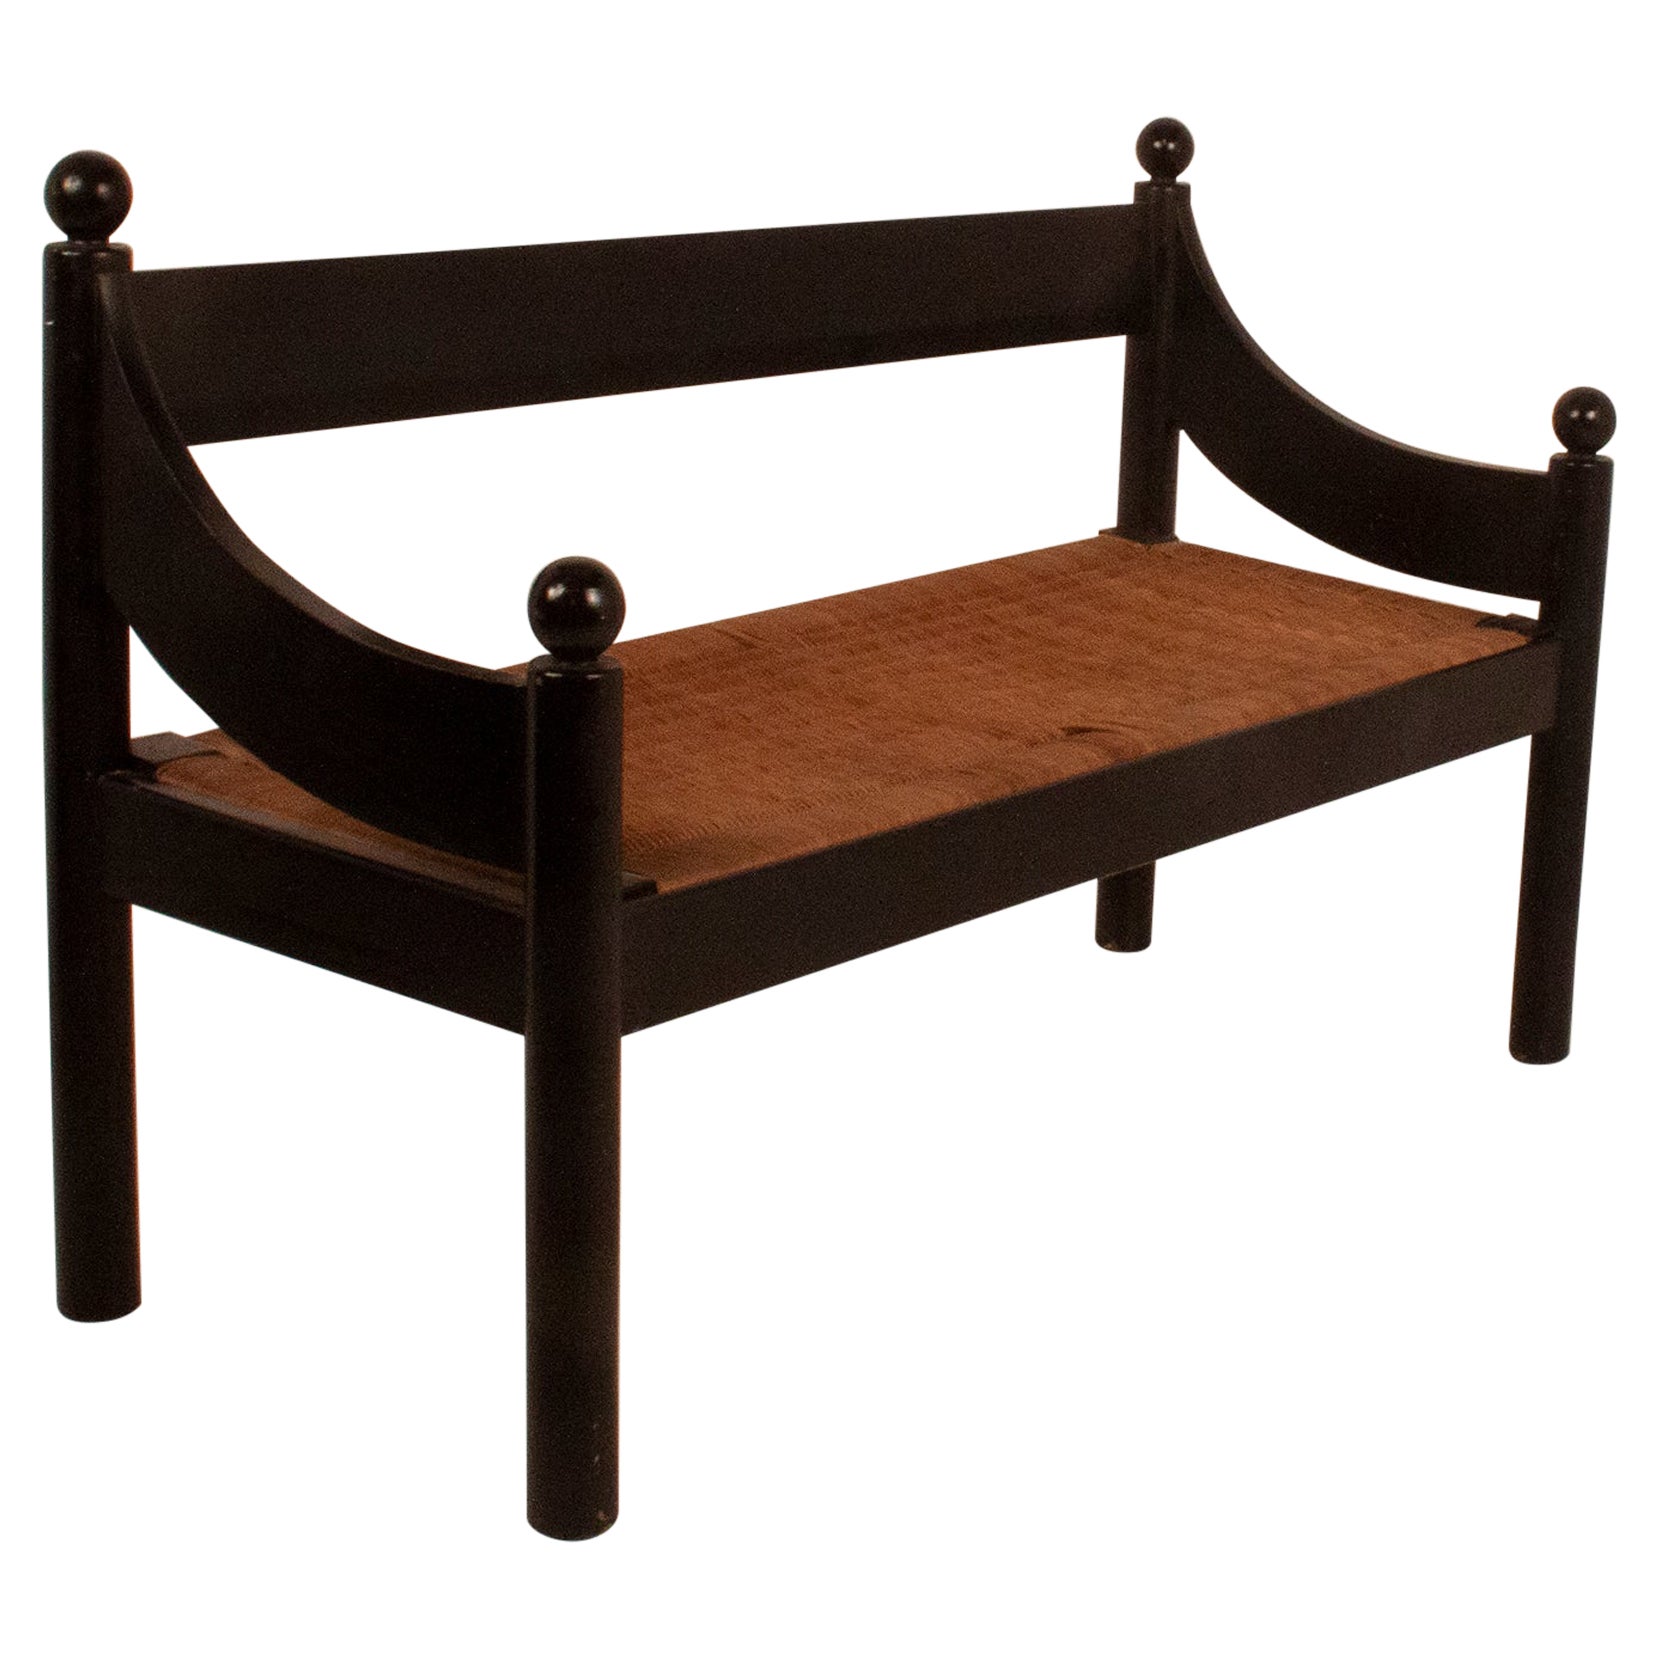 Bench in Black Lacquered Wood and Rush, by Joaquin Belsa, Spain 1970's